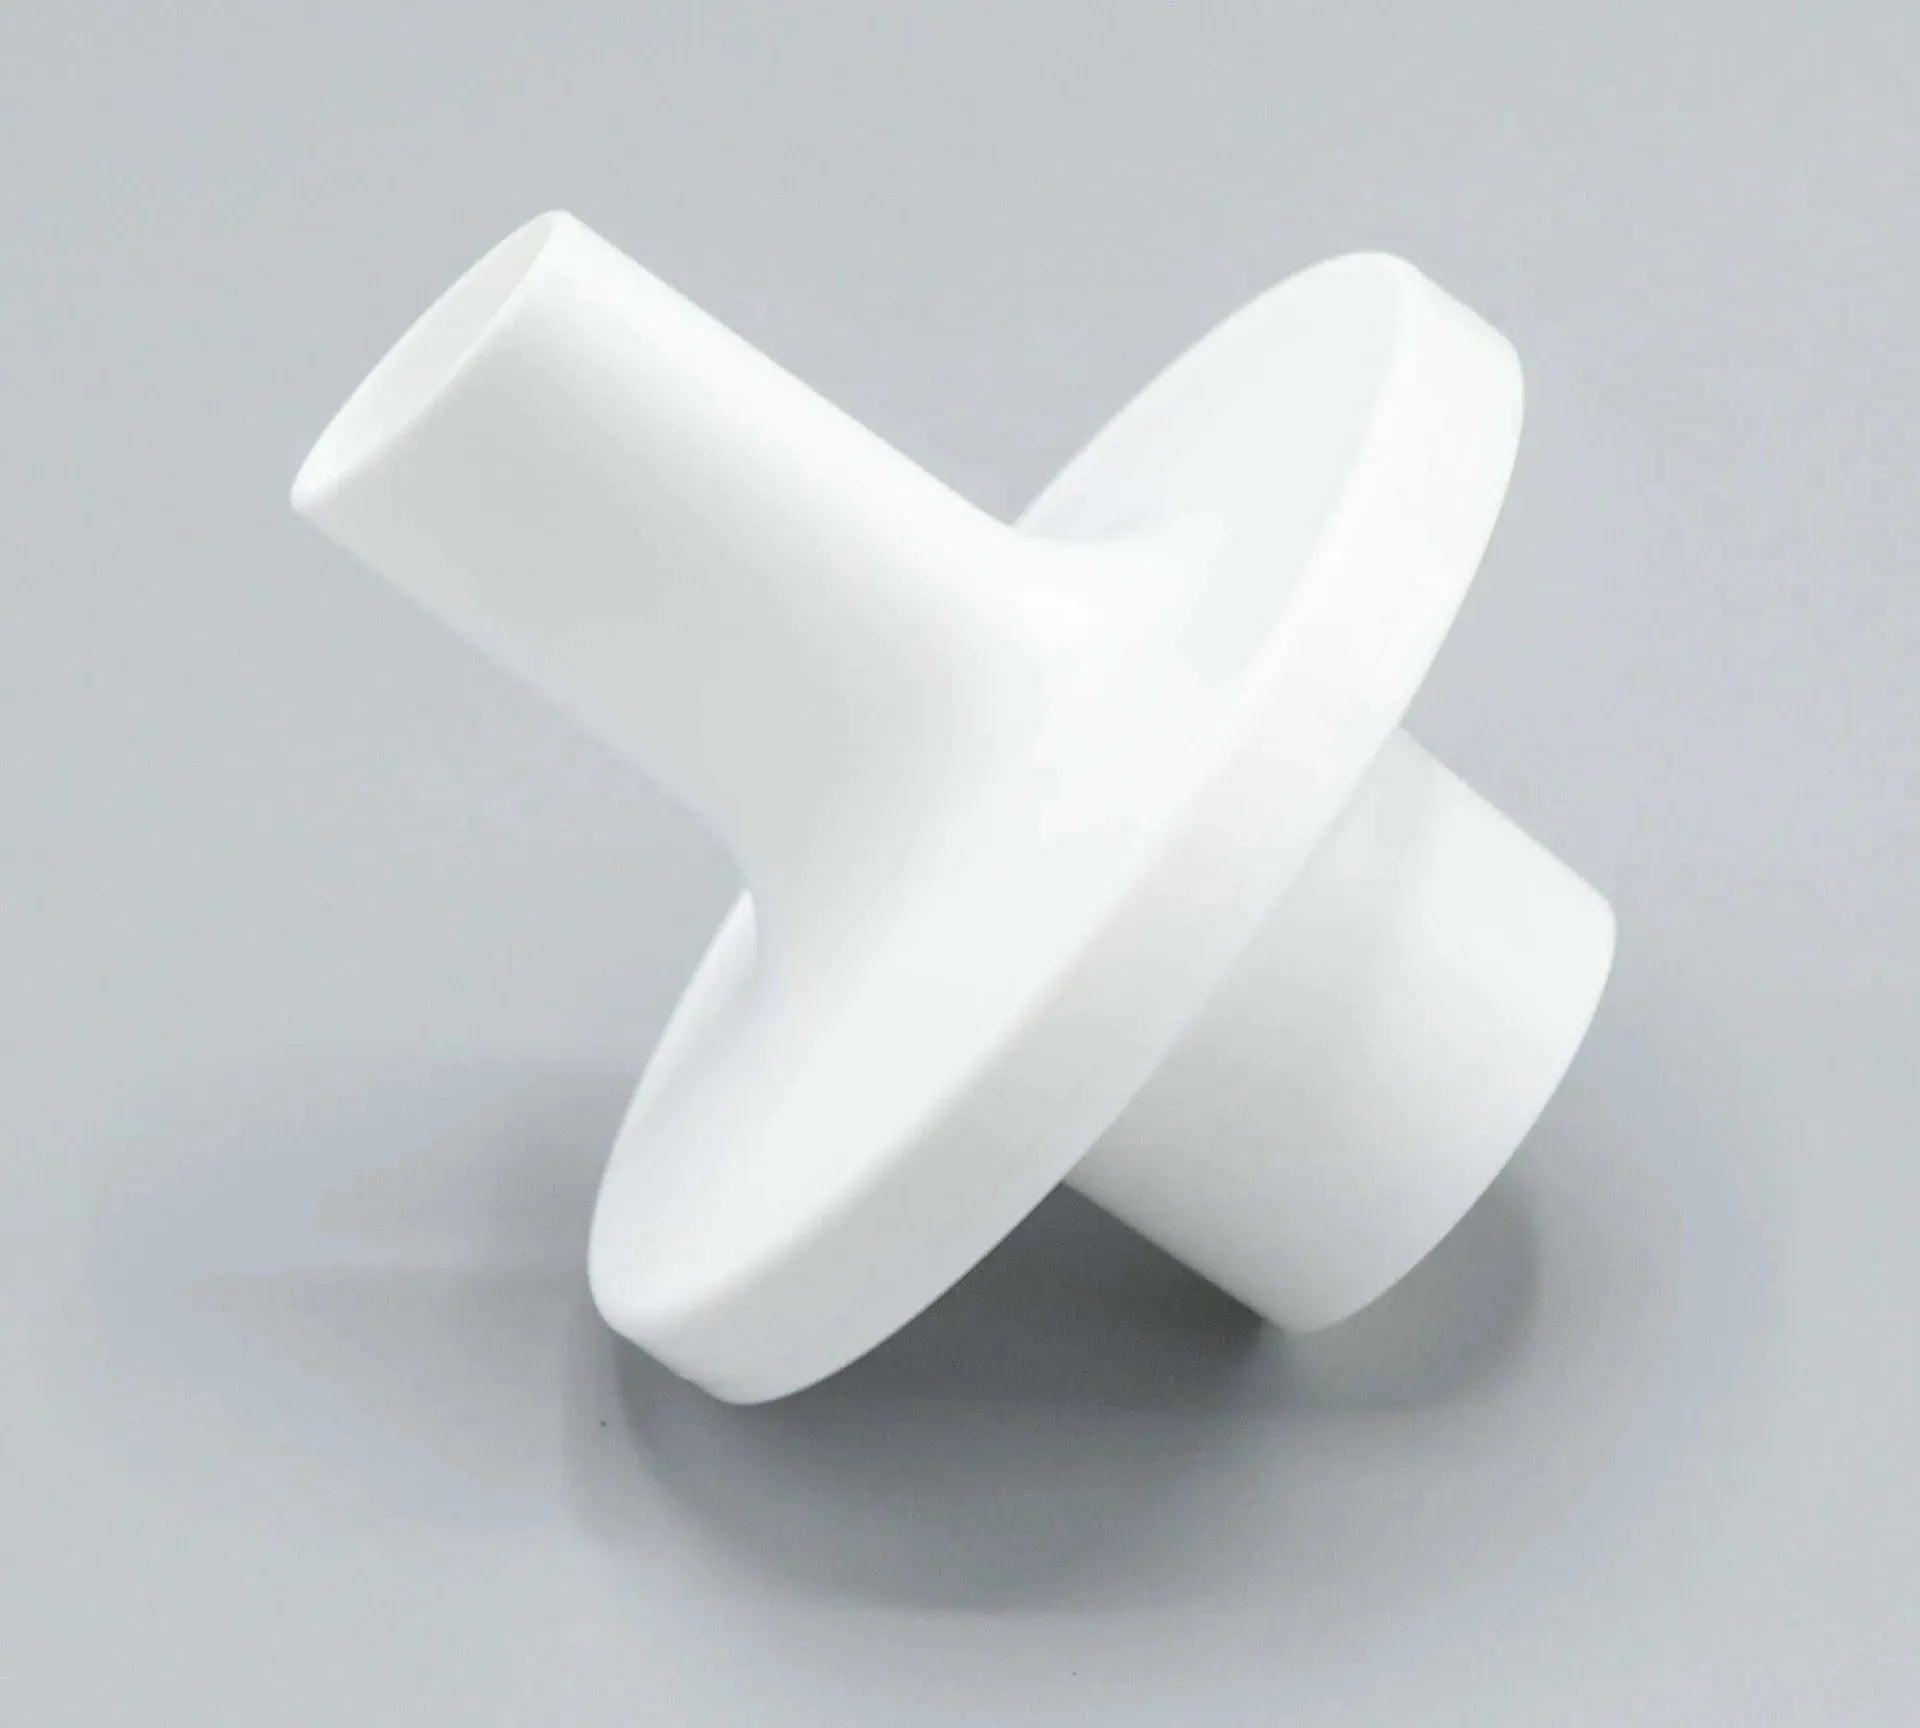 The bacterial/ viral filter mouthpiece shown is elliptical in shape, and white in color.